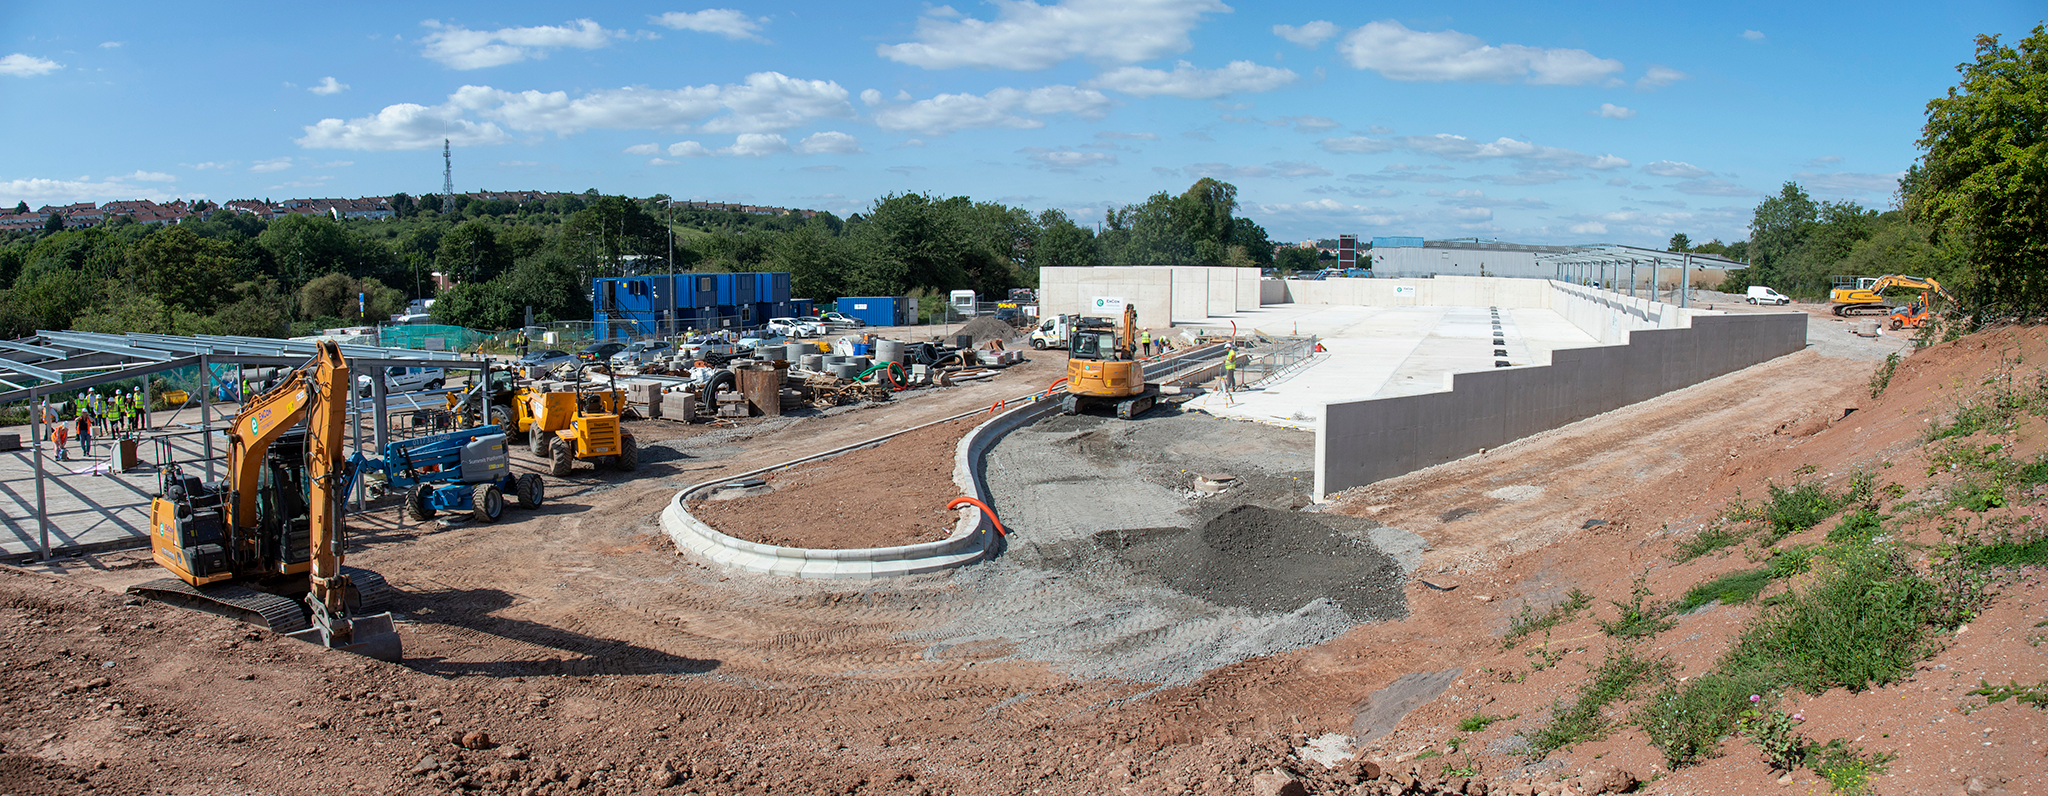 A photo of the partially completed construction of the new recycling centre on Hartcliffe Way, Bristol